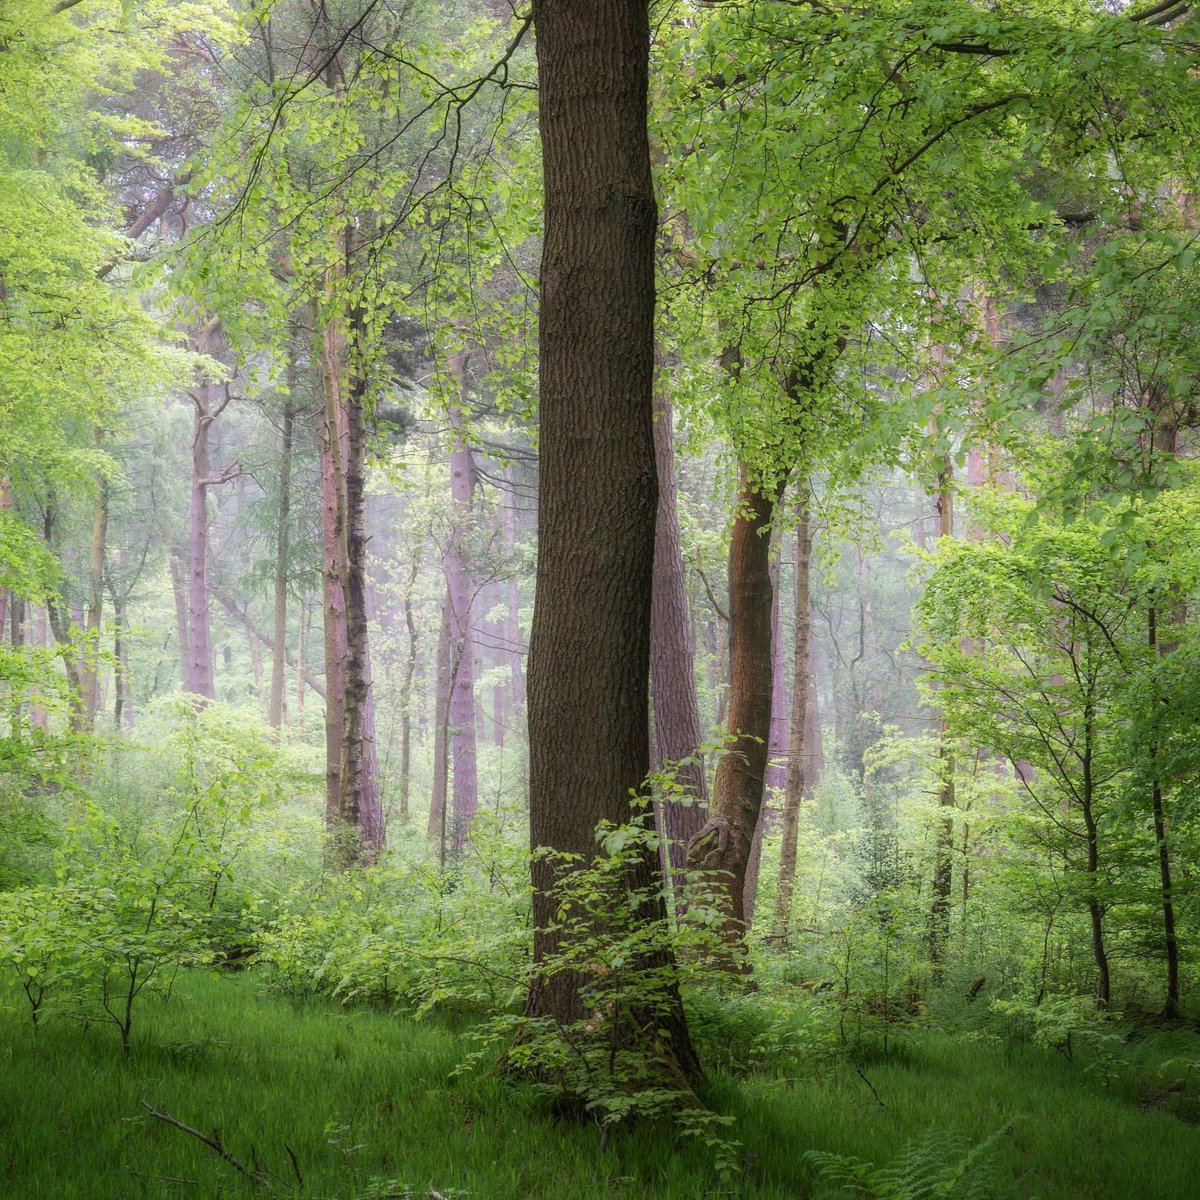 'I think that I shall never see
A poem lovely as a tree.'

Such a beautiful morning in the misty #peakdistrict woods, green and damp and full of birdsong, while this perfect beech tree in his brand new outfit demanded my attention and a portrait. How could I not oblige?!